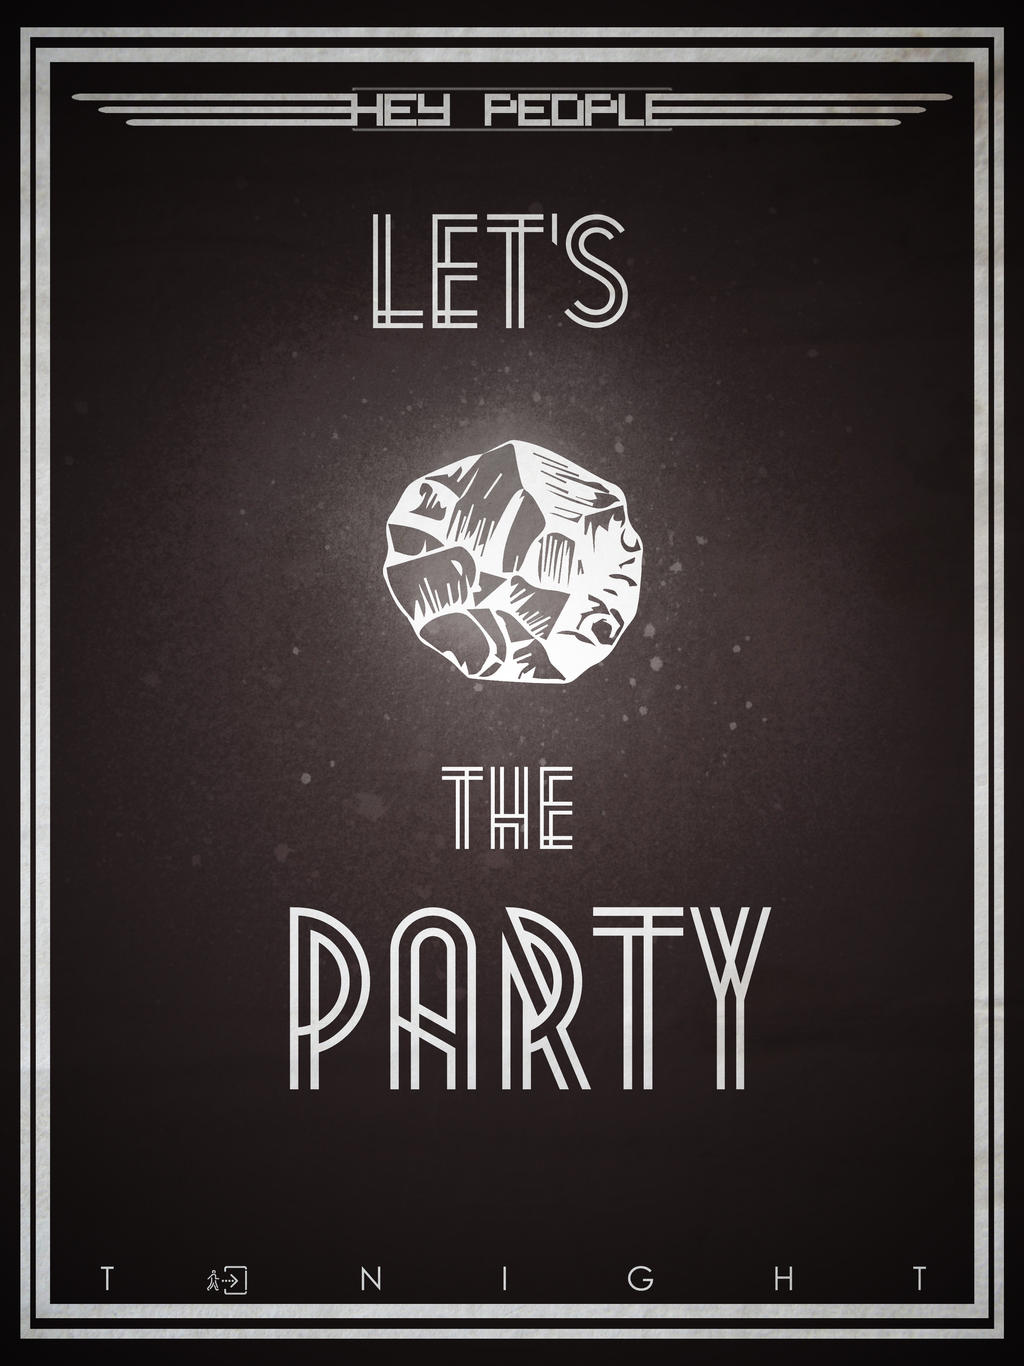 ROck the party Tonight!